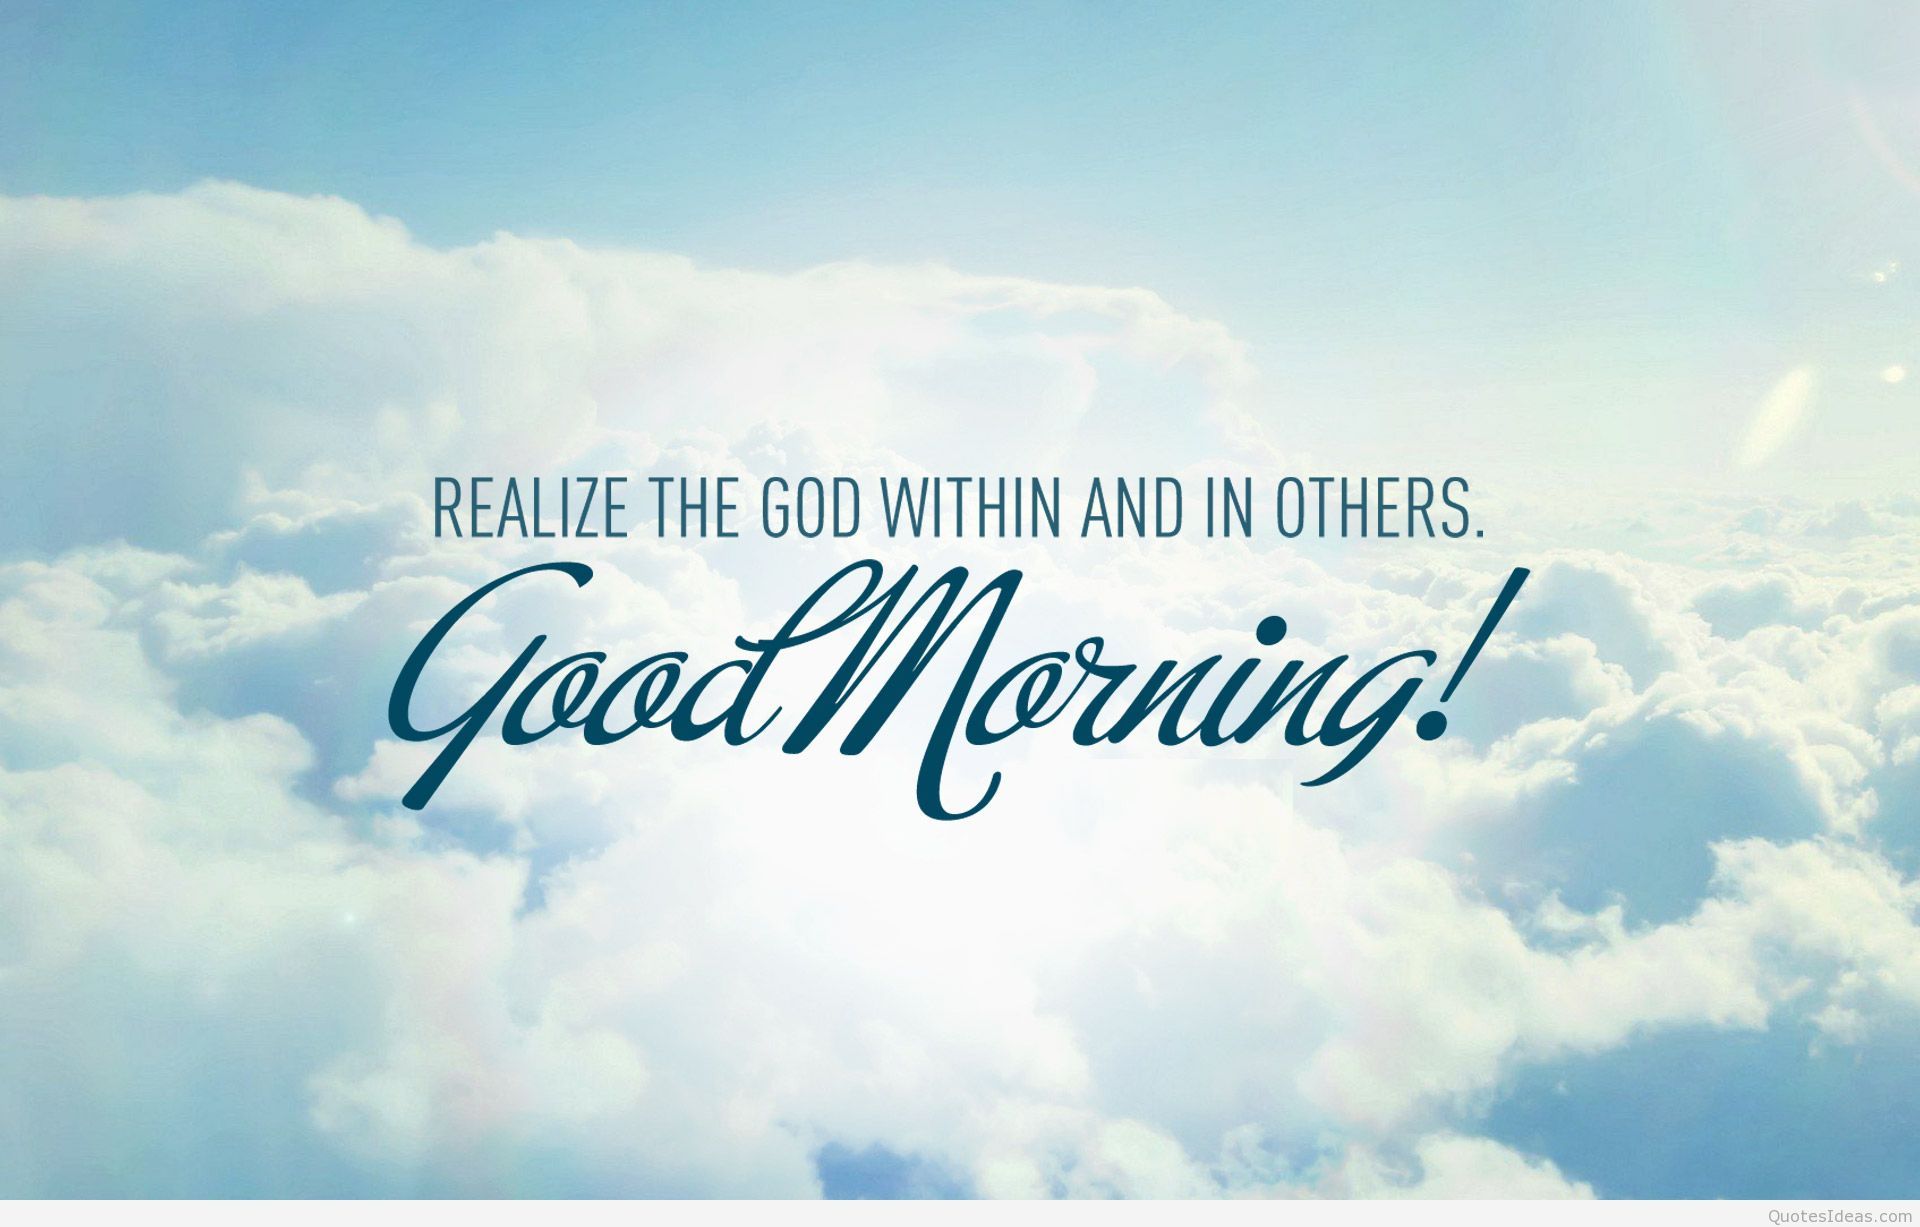 1920x1227 Good Morning Sky Wallpaper With Quote - Good Morning Image With Quotes HD - 1920x1227 Wallpaper - teahub.io on WallpaperBat